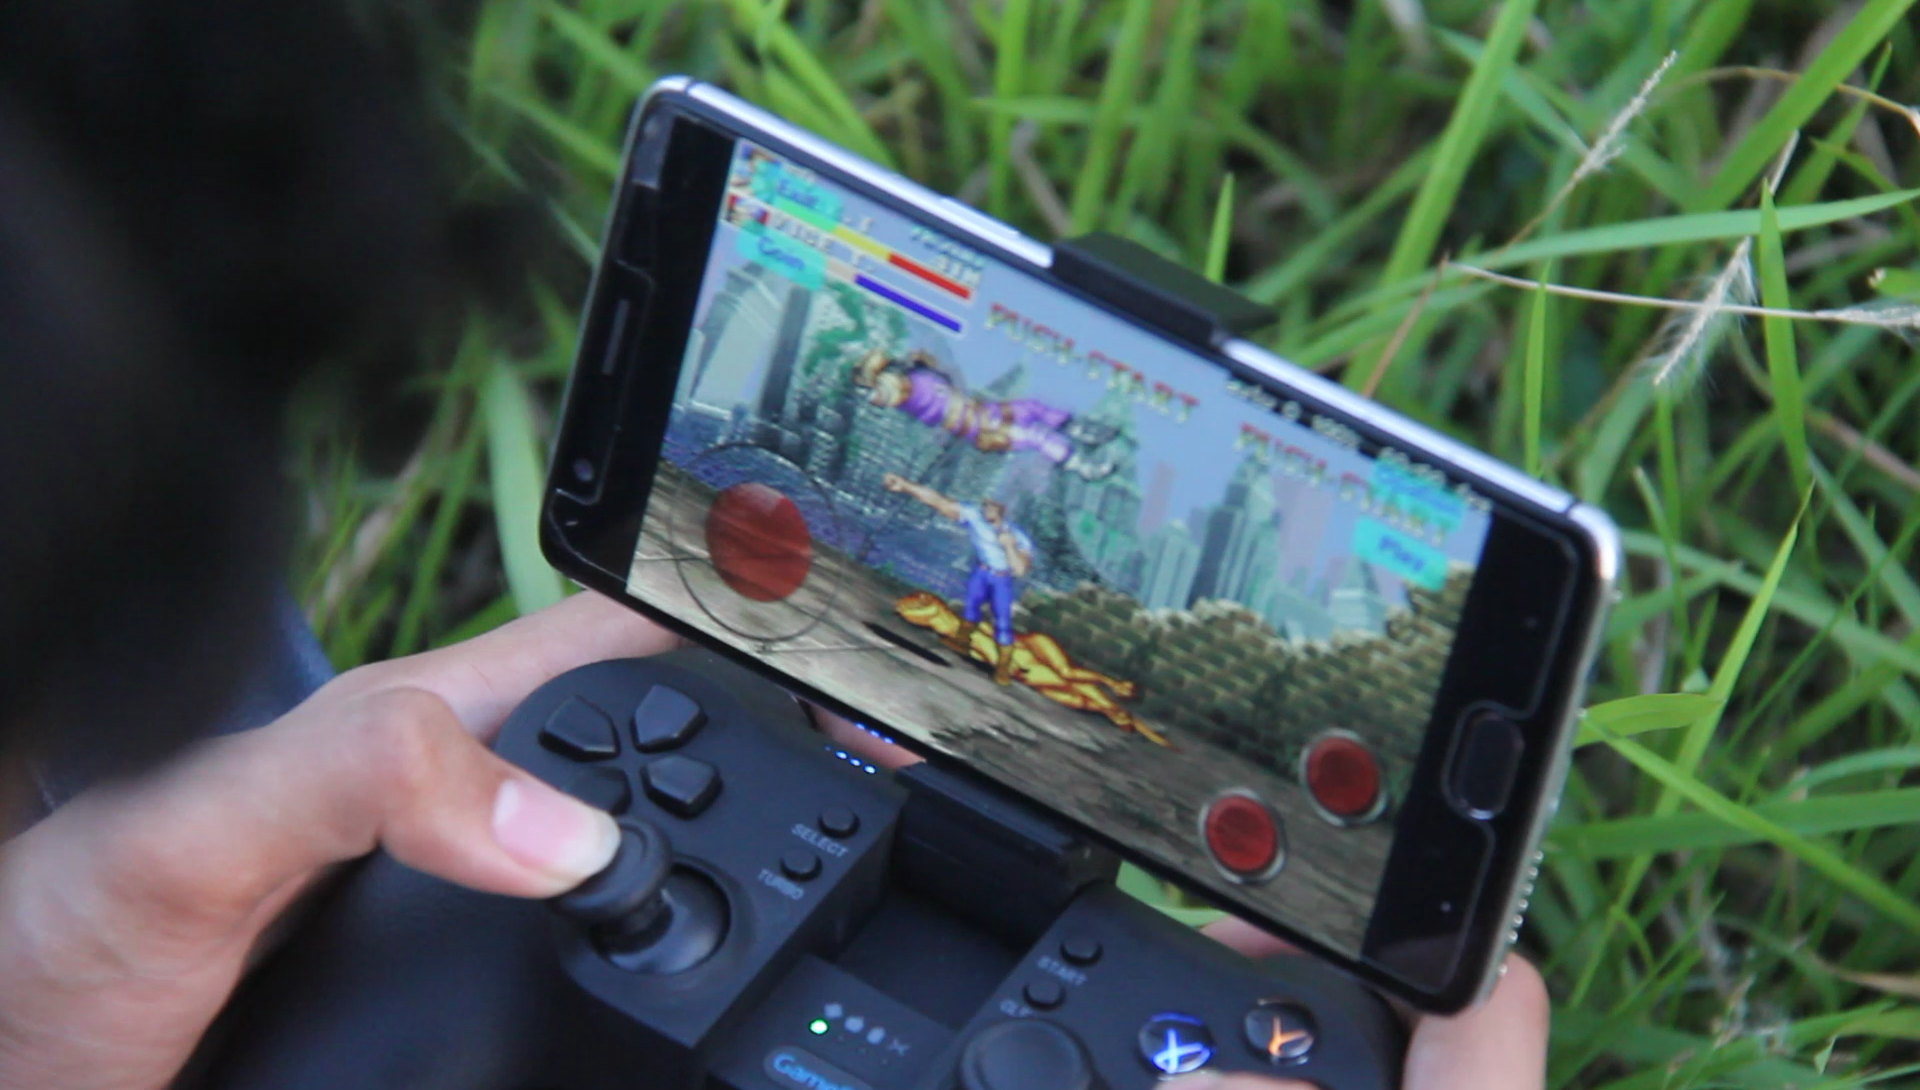 GameSir T1s Android Game performace Test with Cadillac & Dinosaur